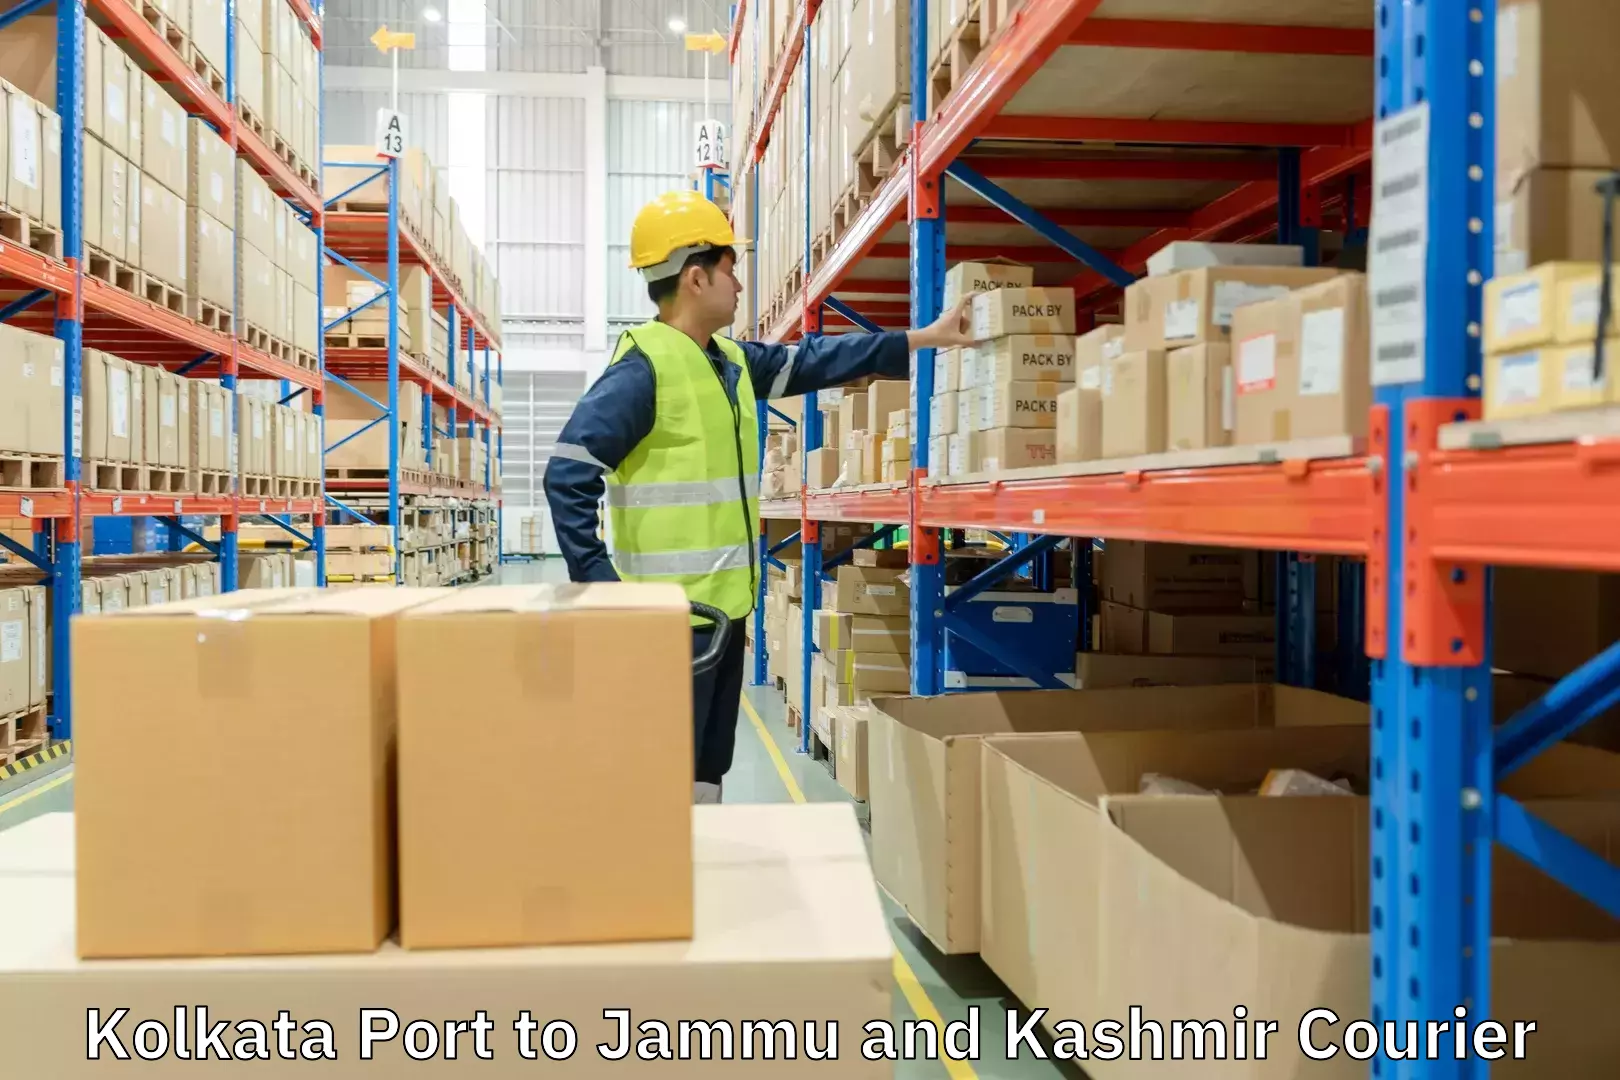 Quick courier services Kolkata Port to Jammu and Kashmir